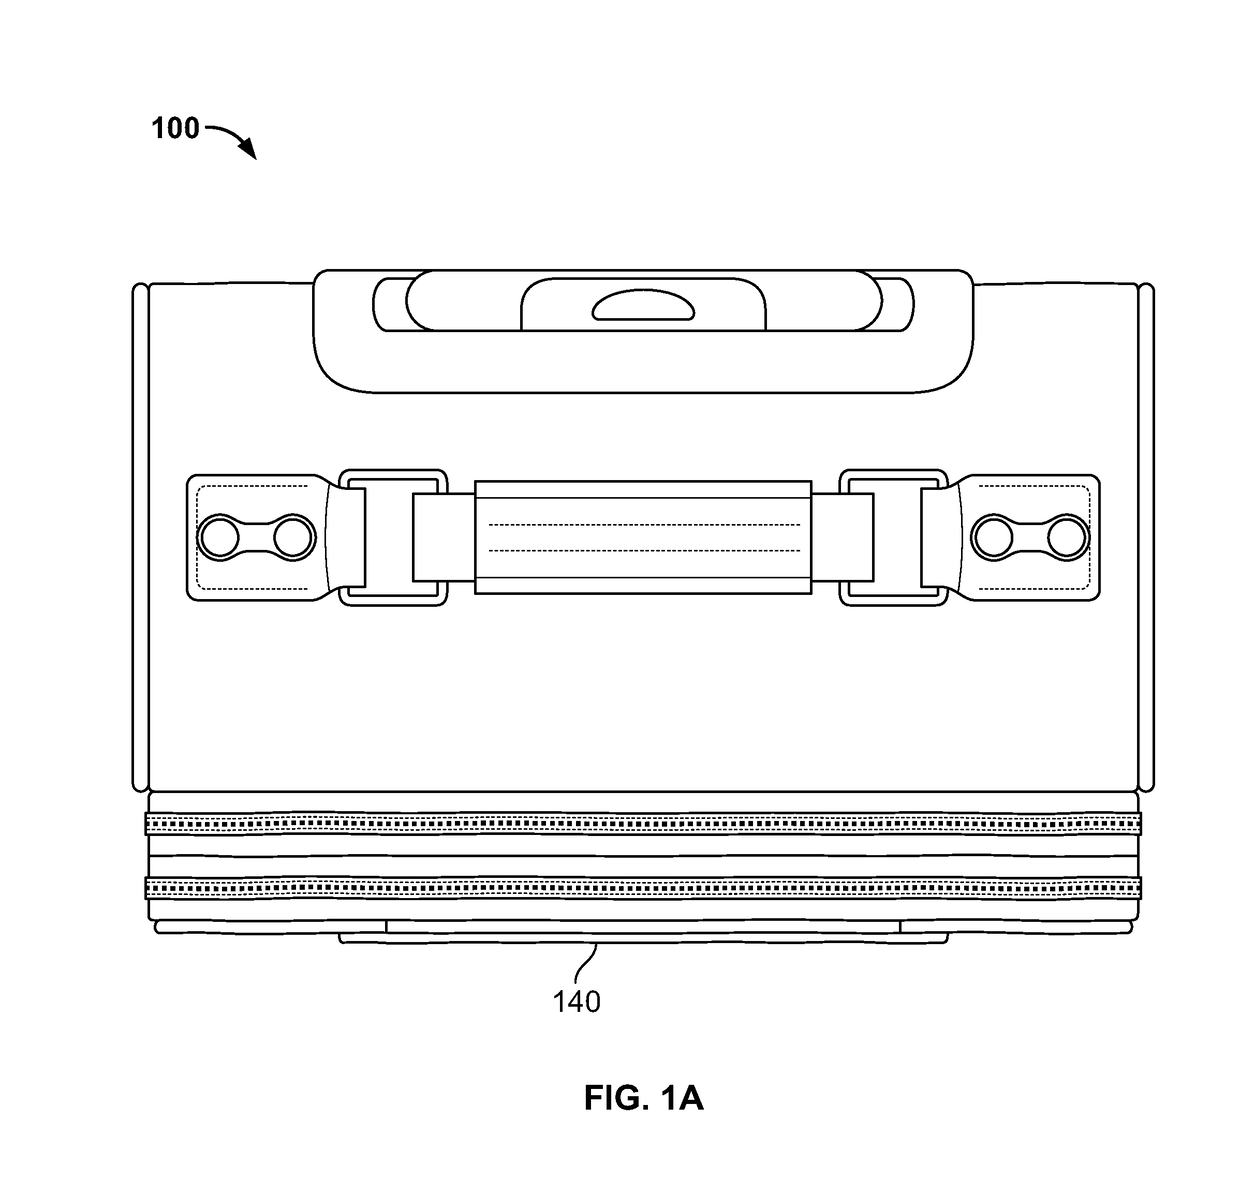 Luggage with hidden storage compartment within expandable area